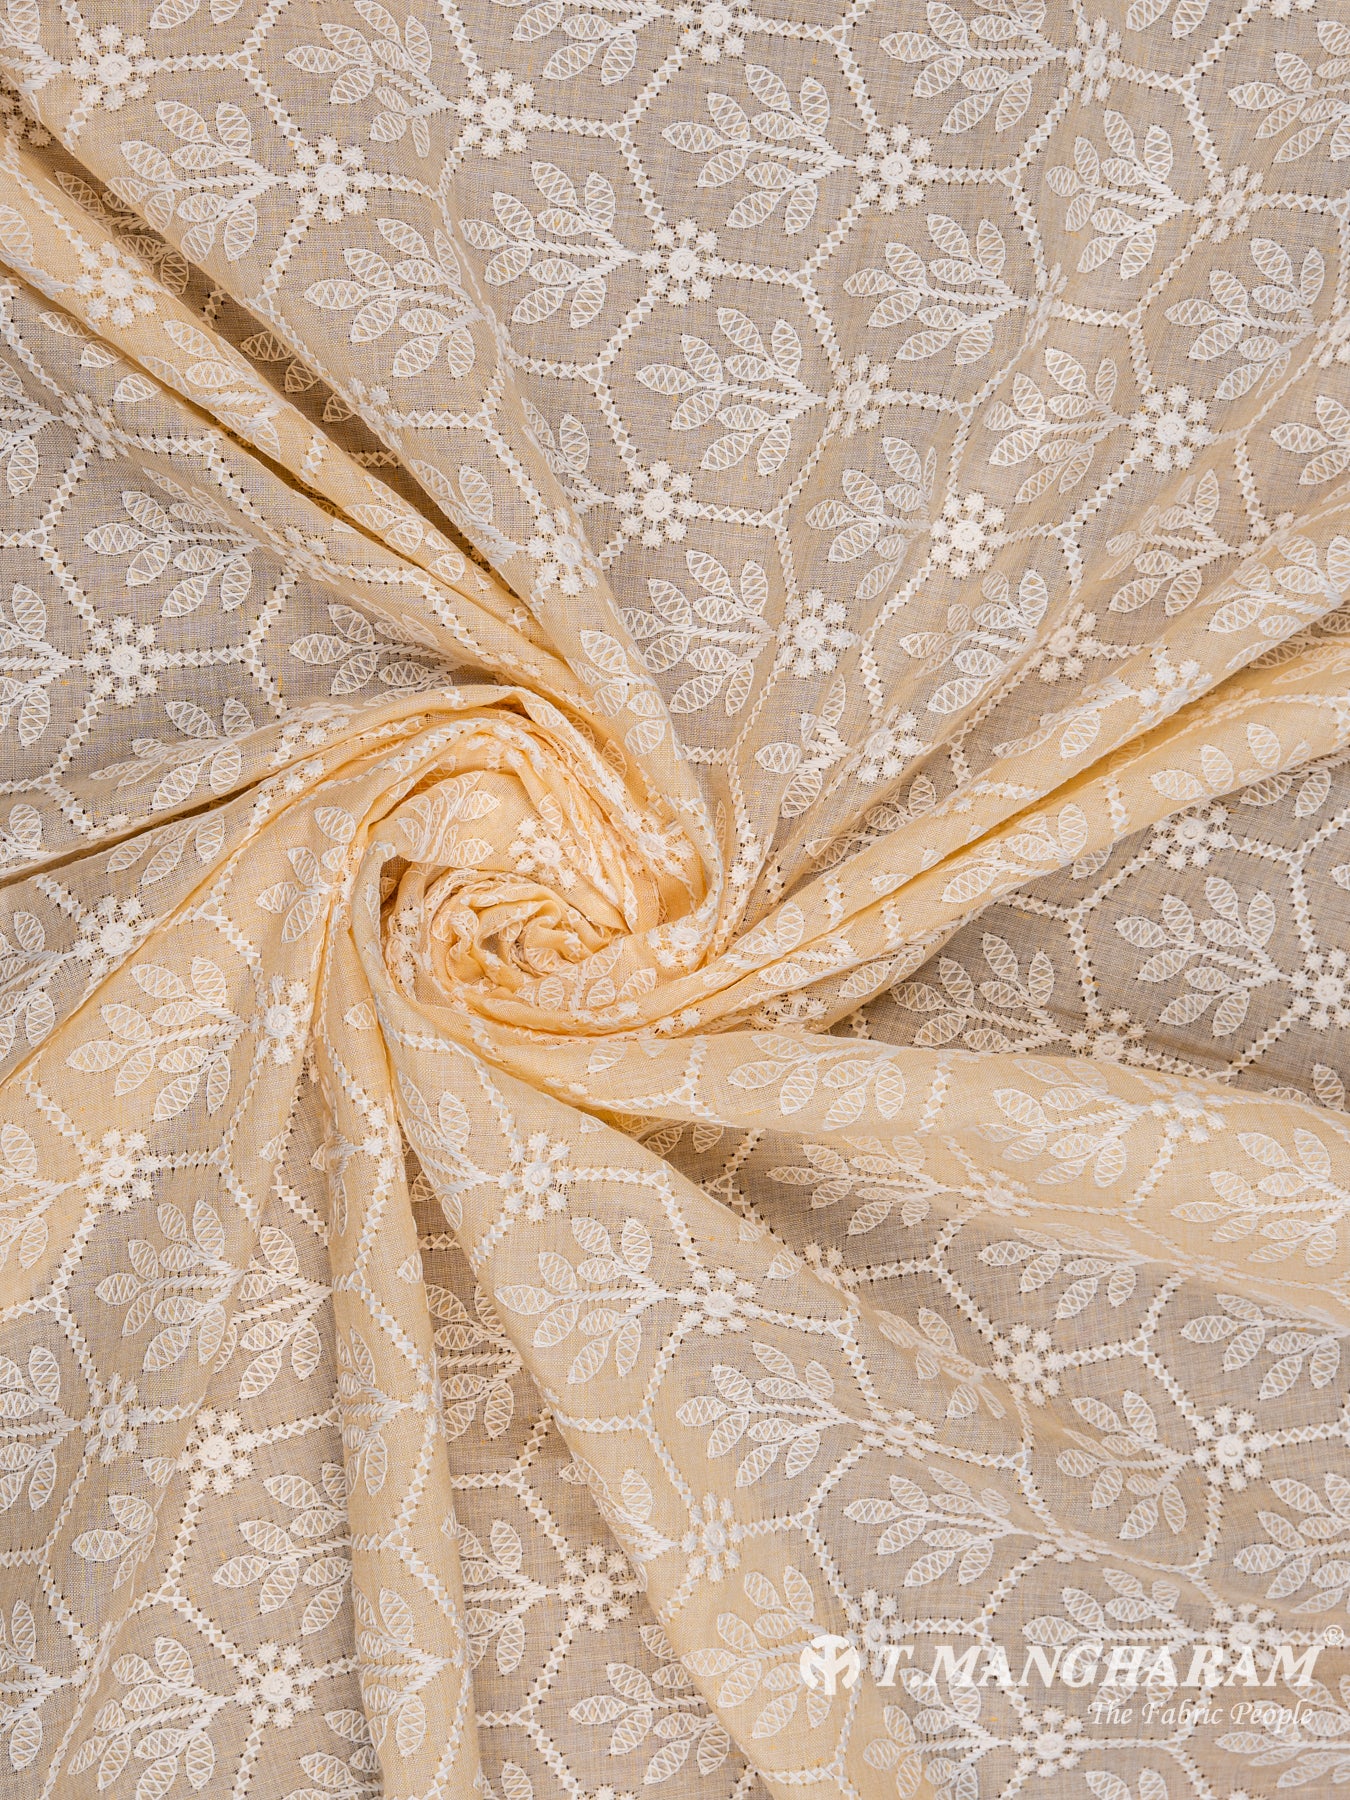 Beige Cotton Embroidery Fabric - EB4808 view-1